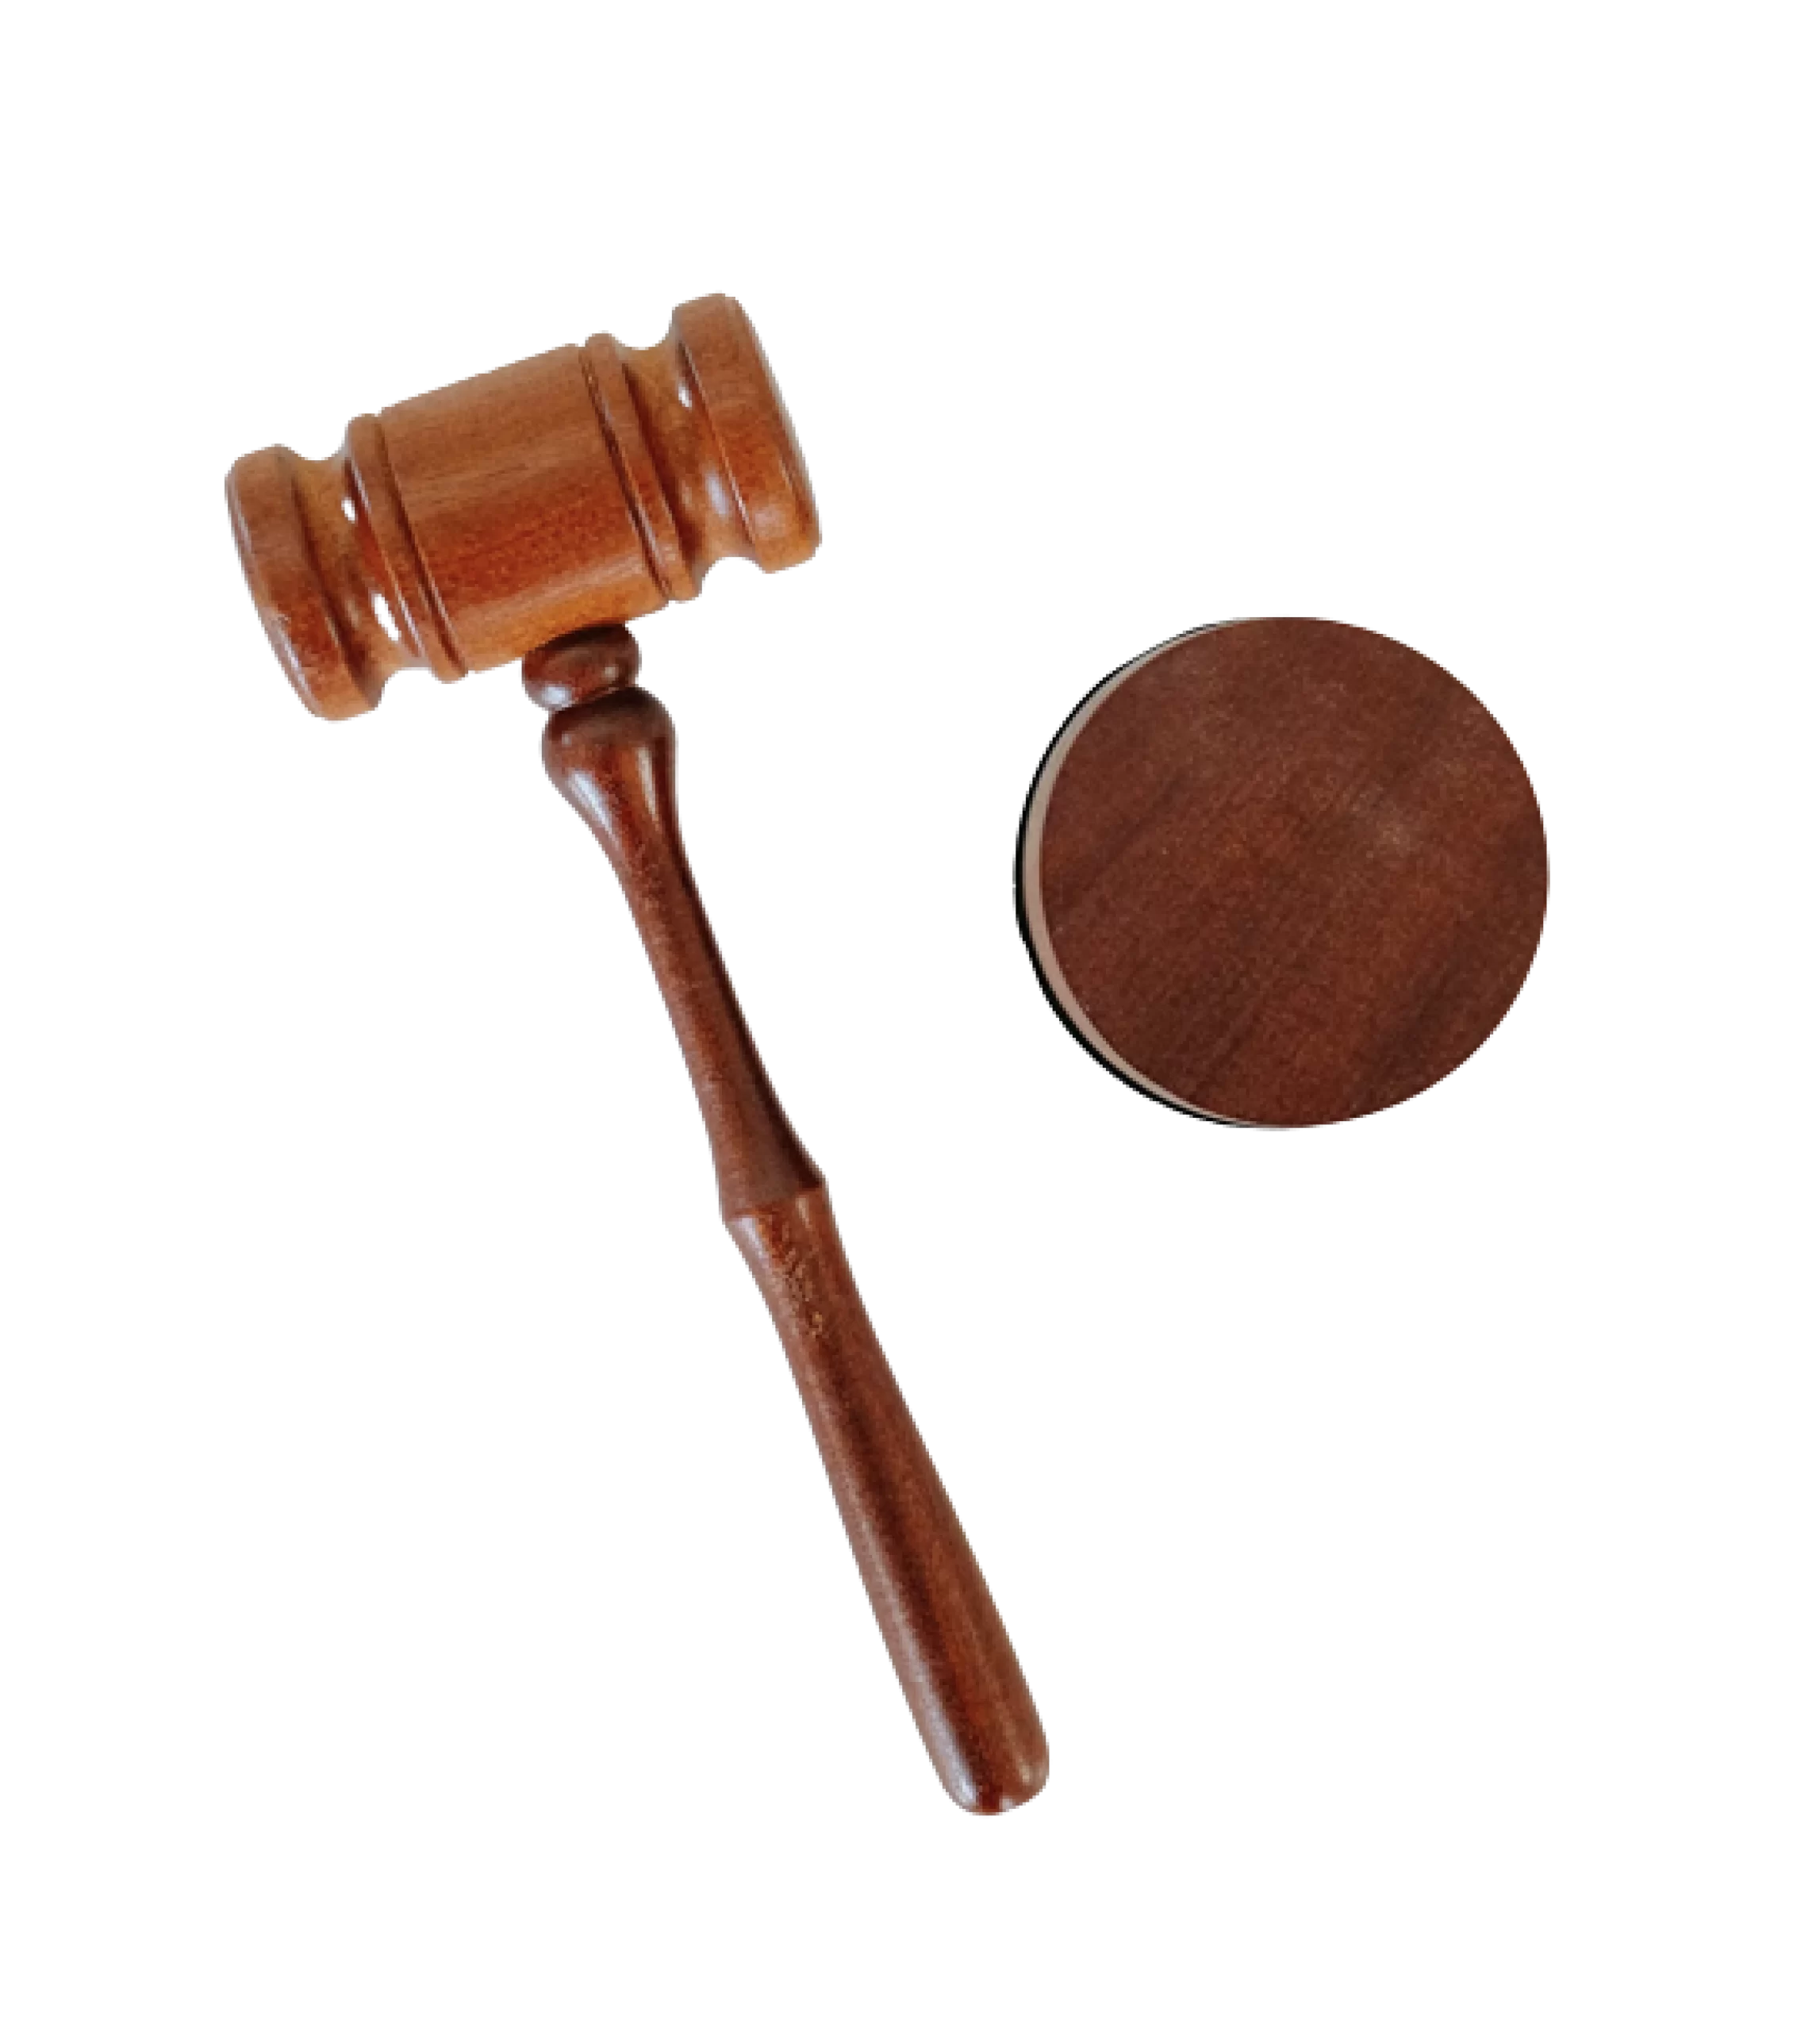 A wooden gavel and sound block on a black background.